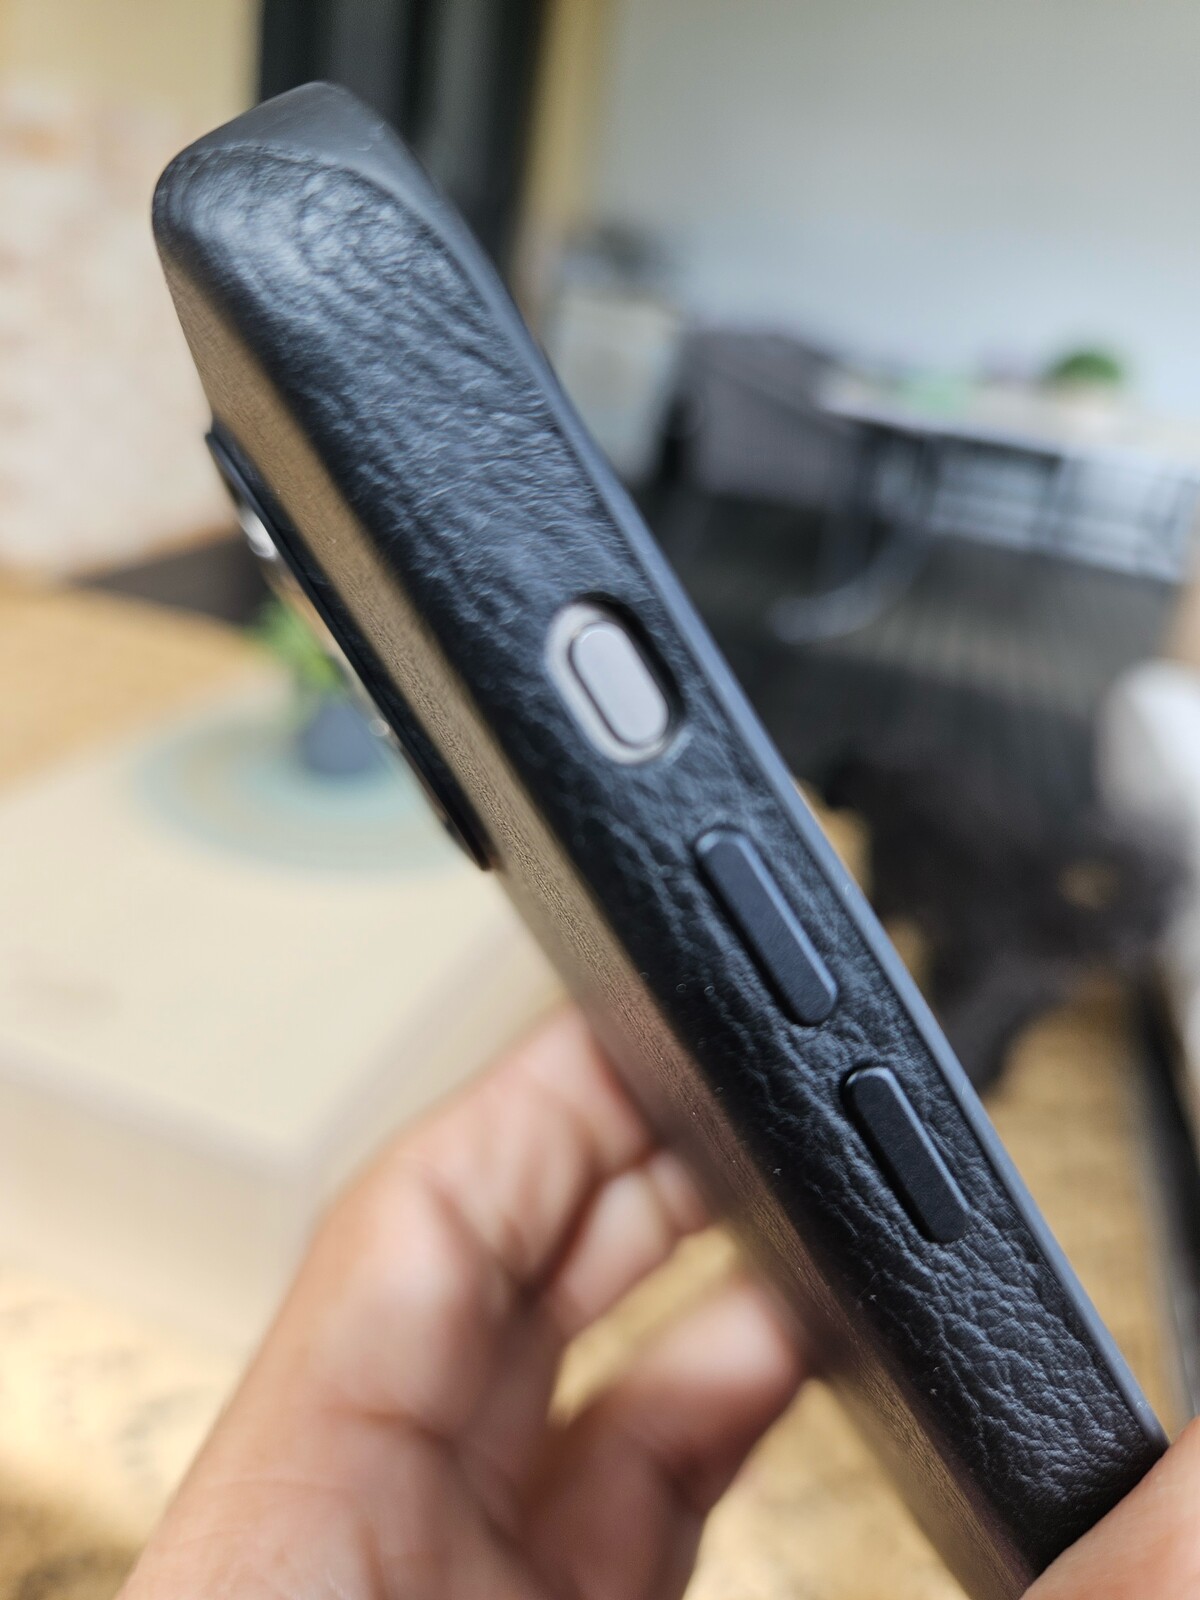 Some third-party iPhone 15 Pro series cases have a design flaw